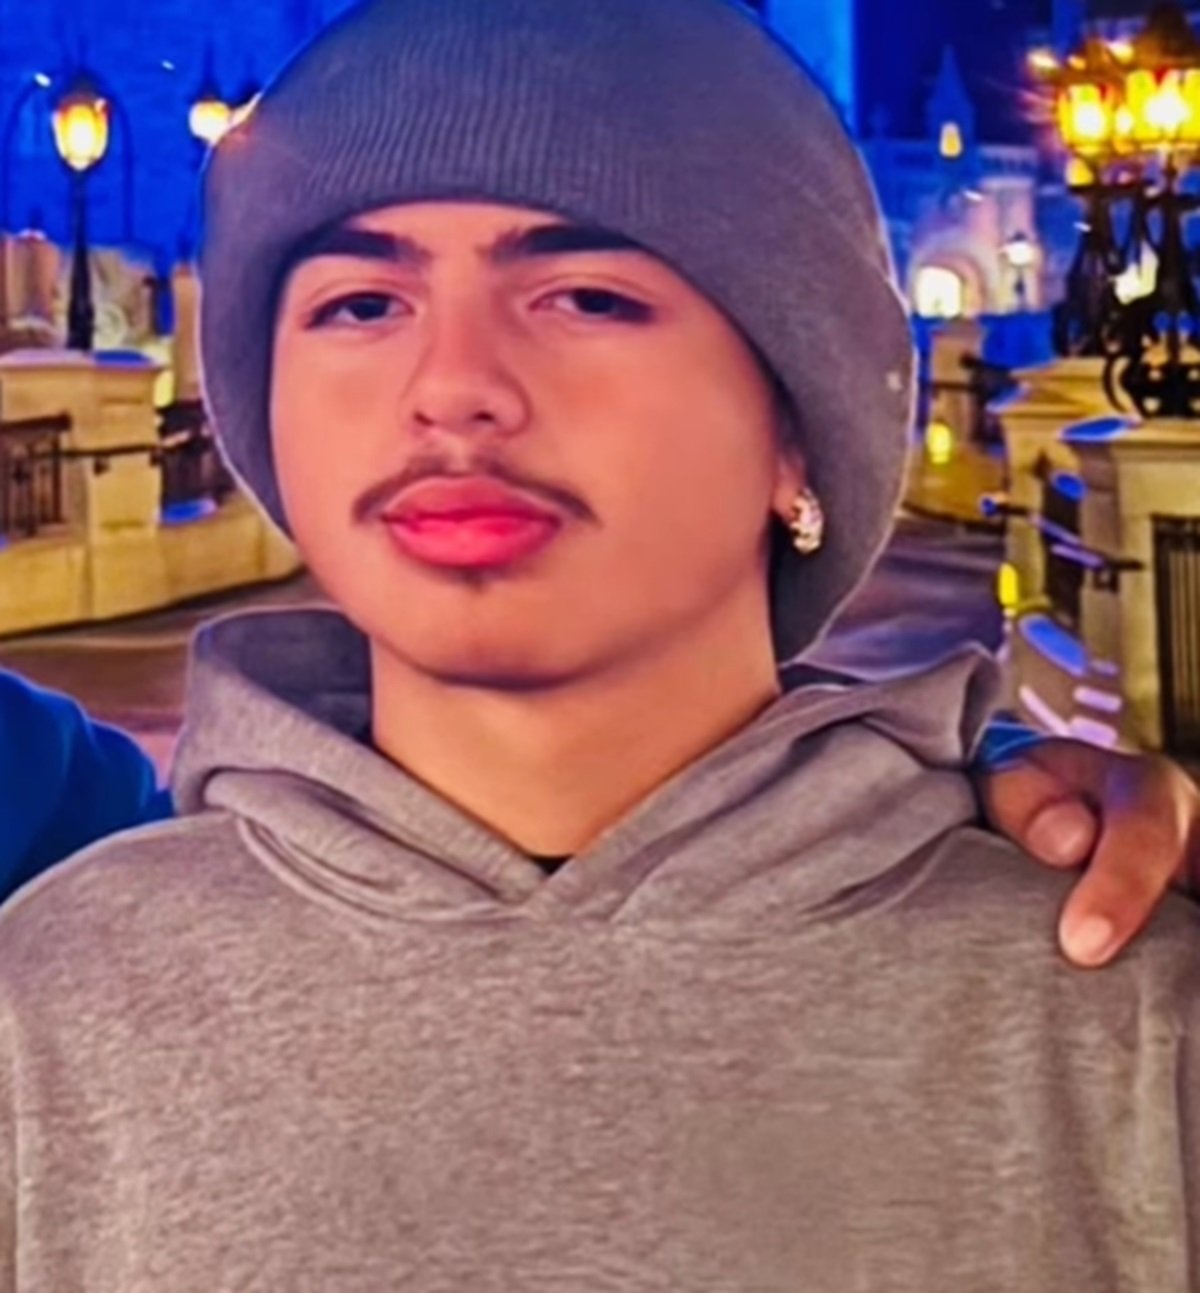 David Zelaya Missing: Family Seeks Help To Locate 16-Year-Old Missing From West Covina